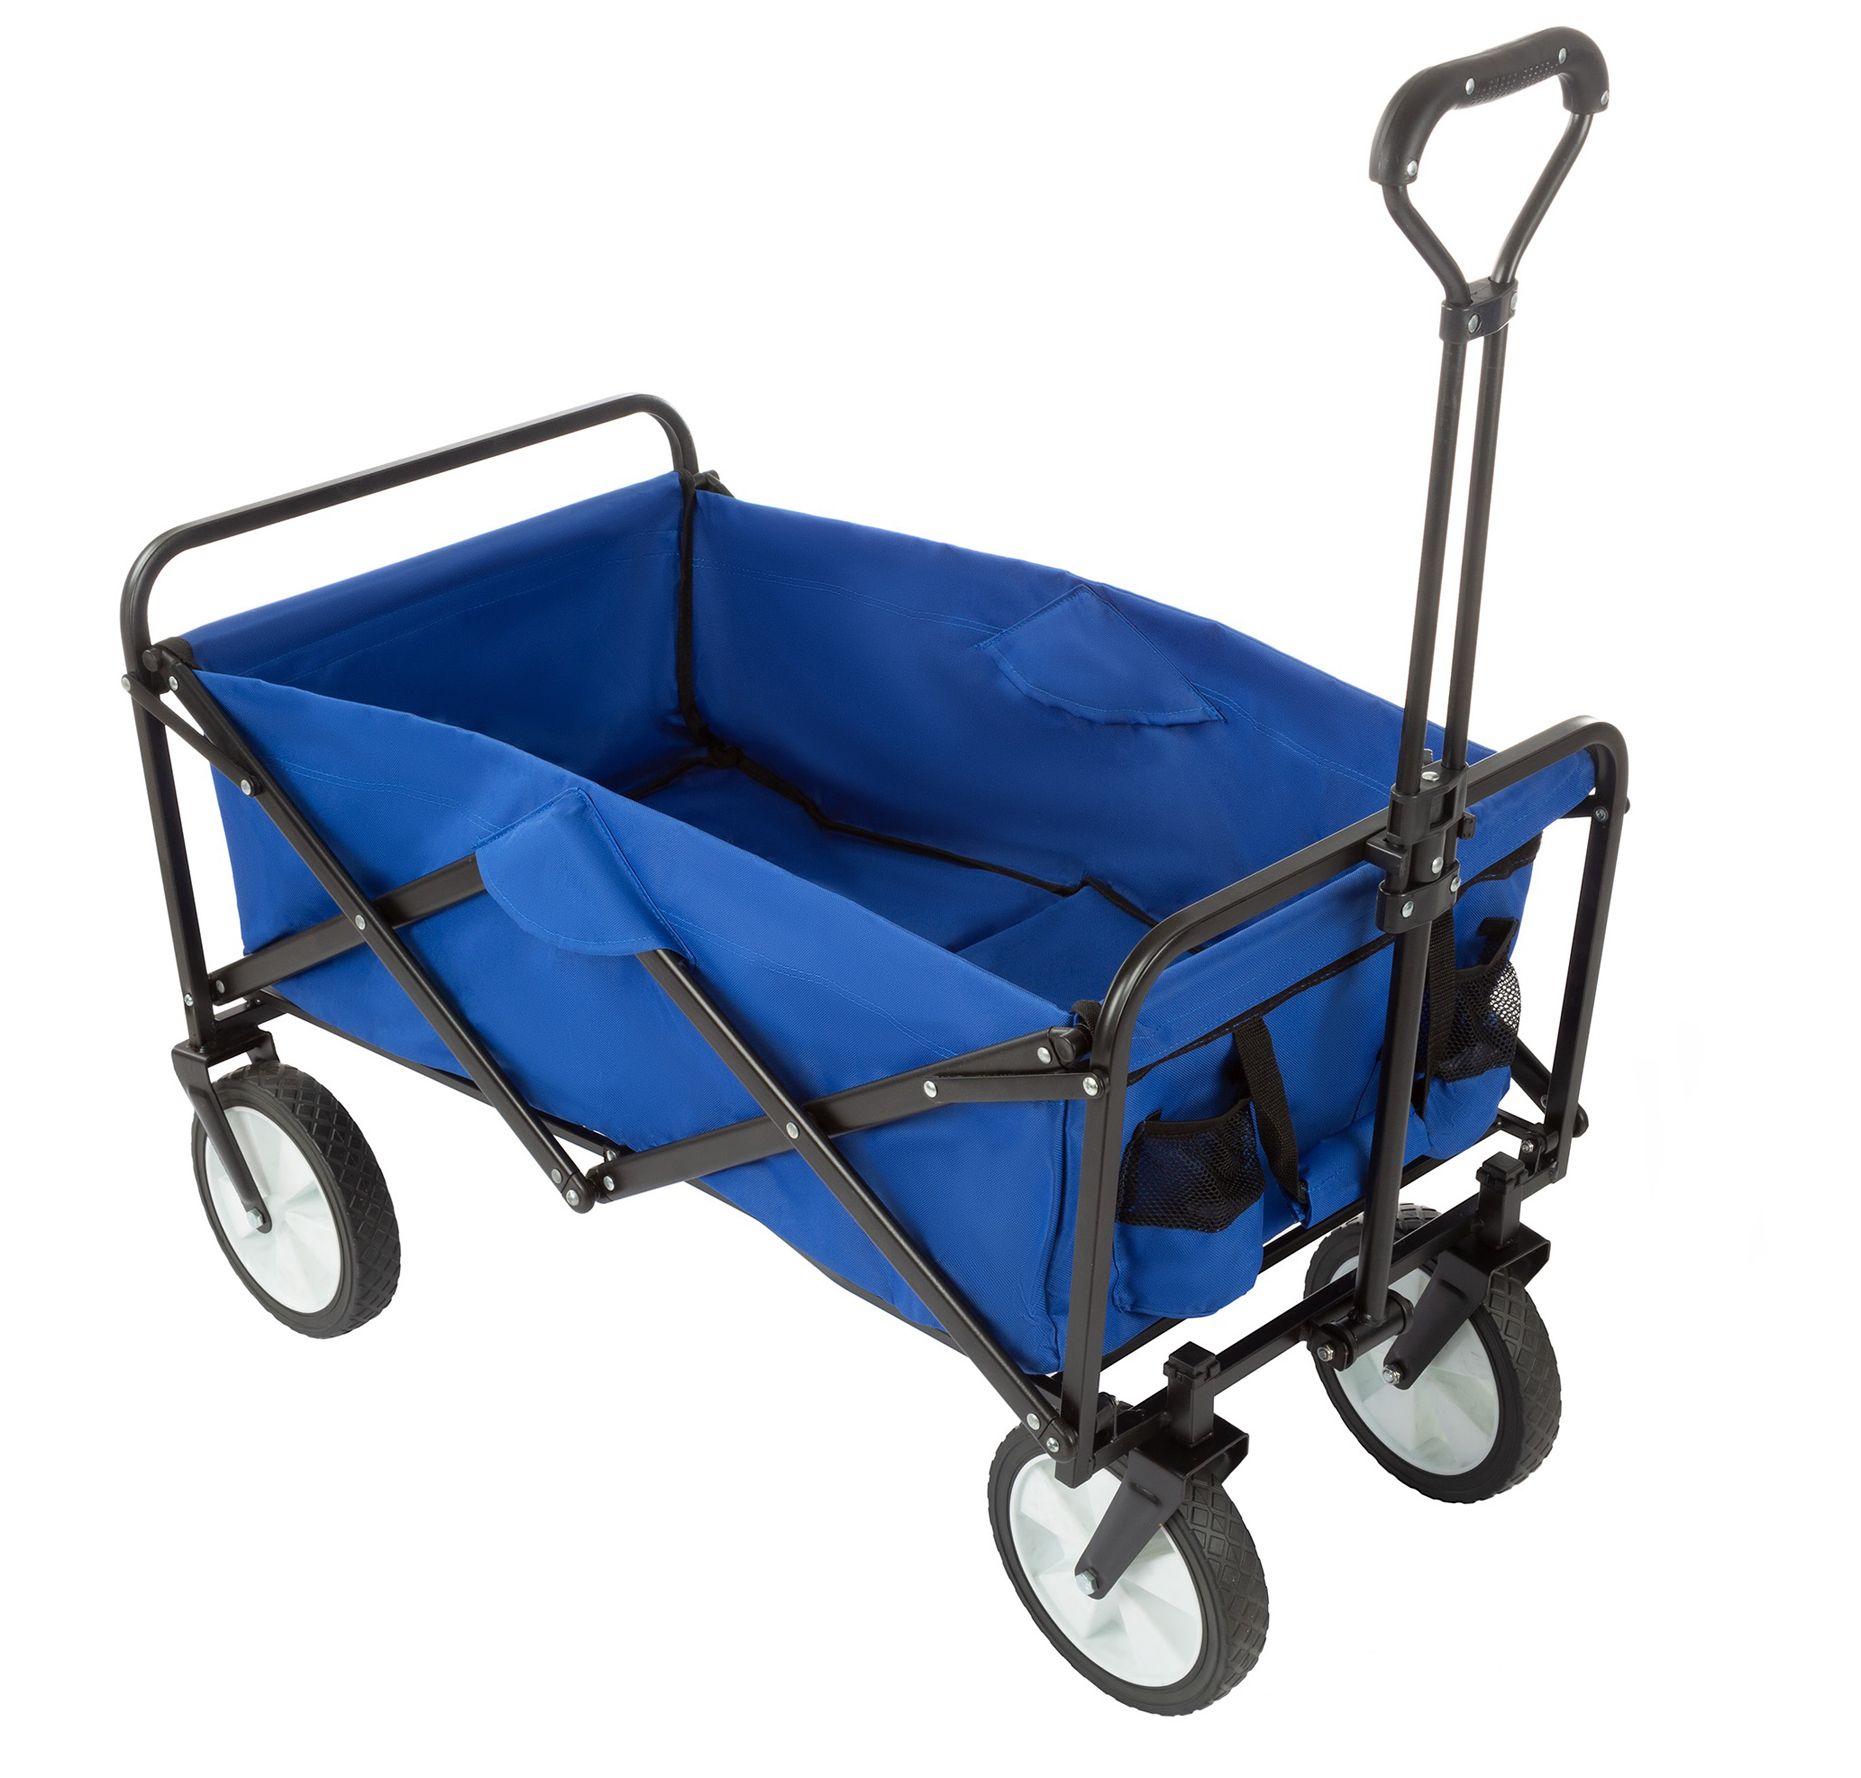 Collapsible Utility Wagon by Pure Garden - QVC.com